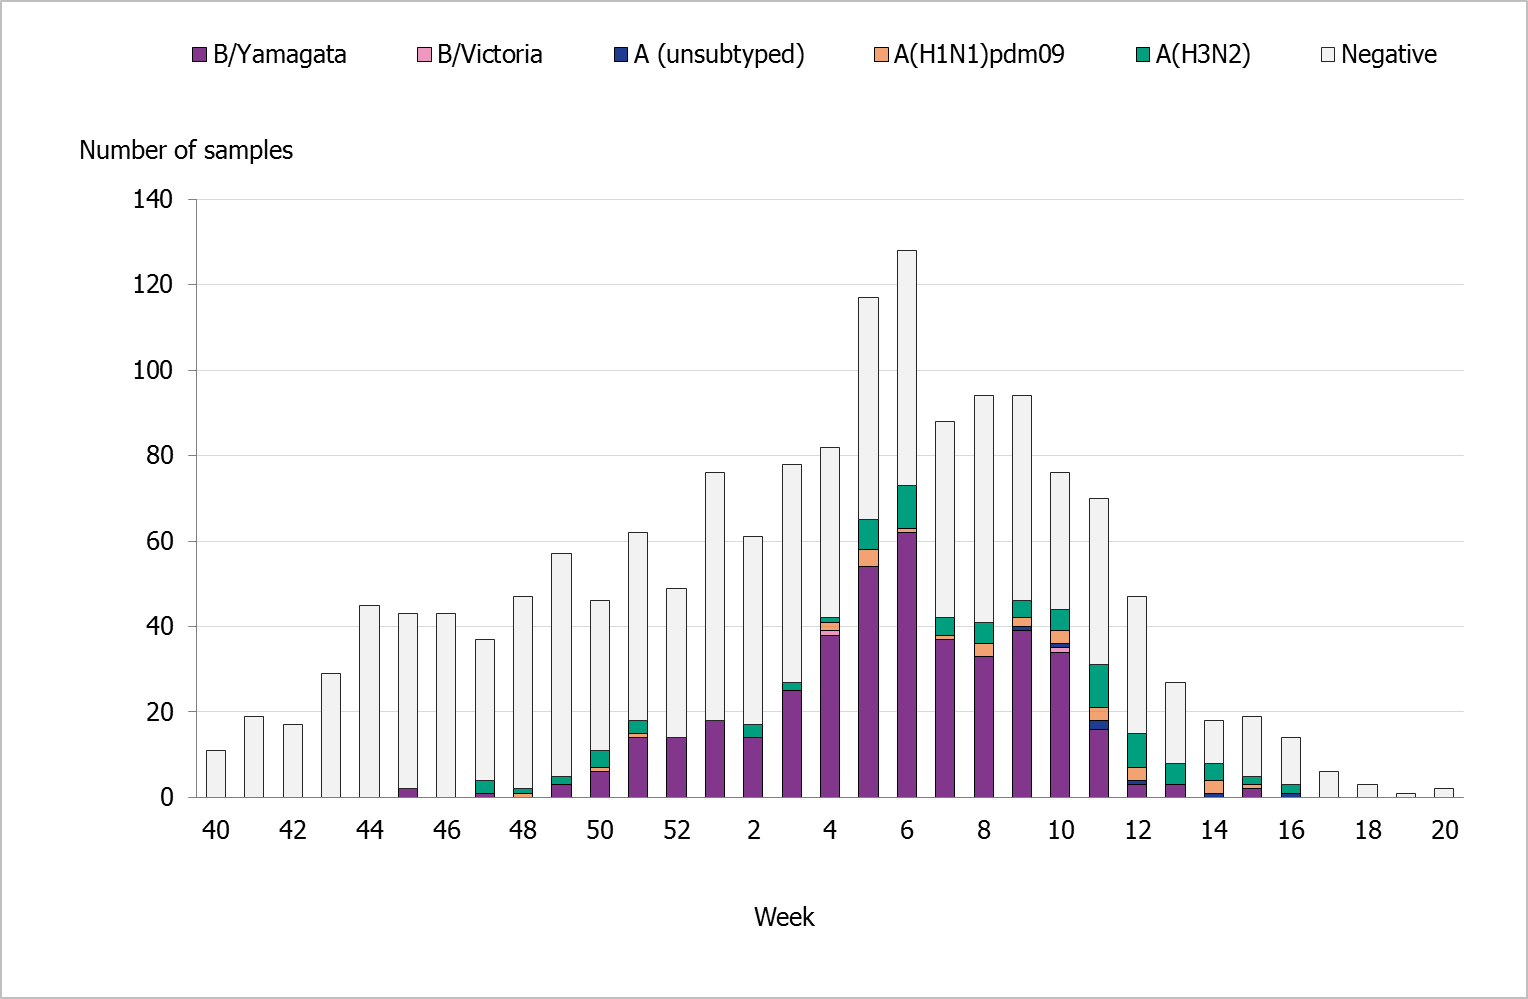 Number of sentinel samples submitted each week and the number of samples by subtype/lineage. B-Yamagata is by far the most prominent. 